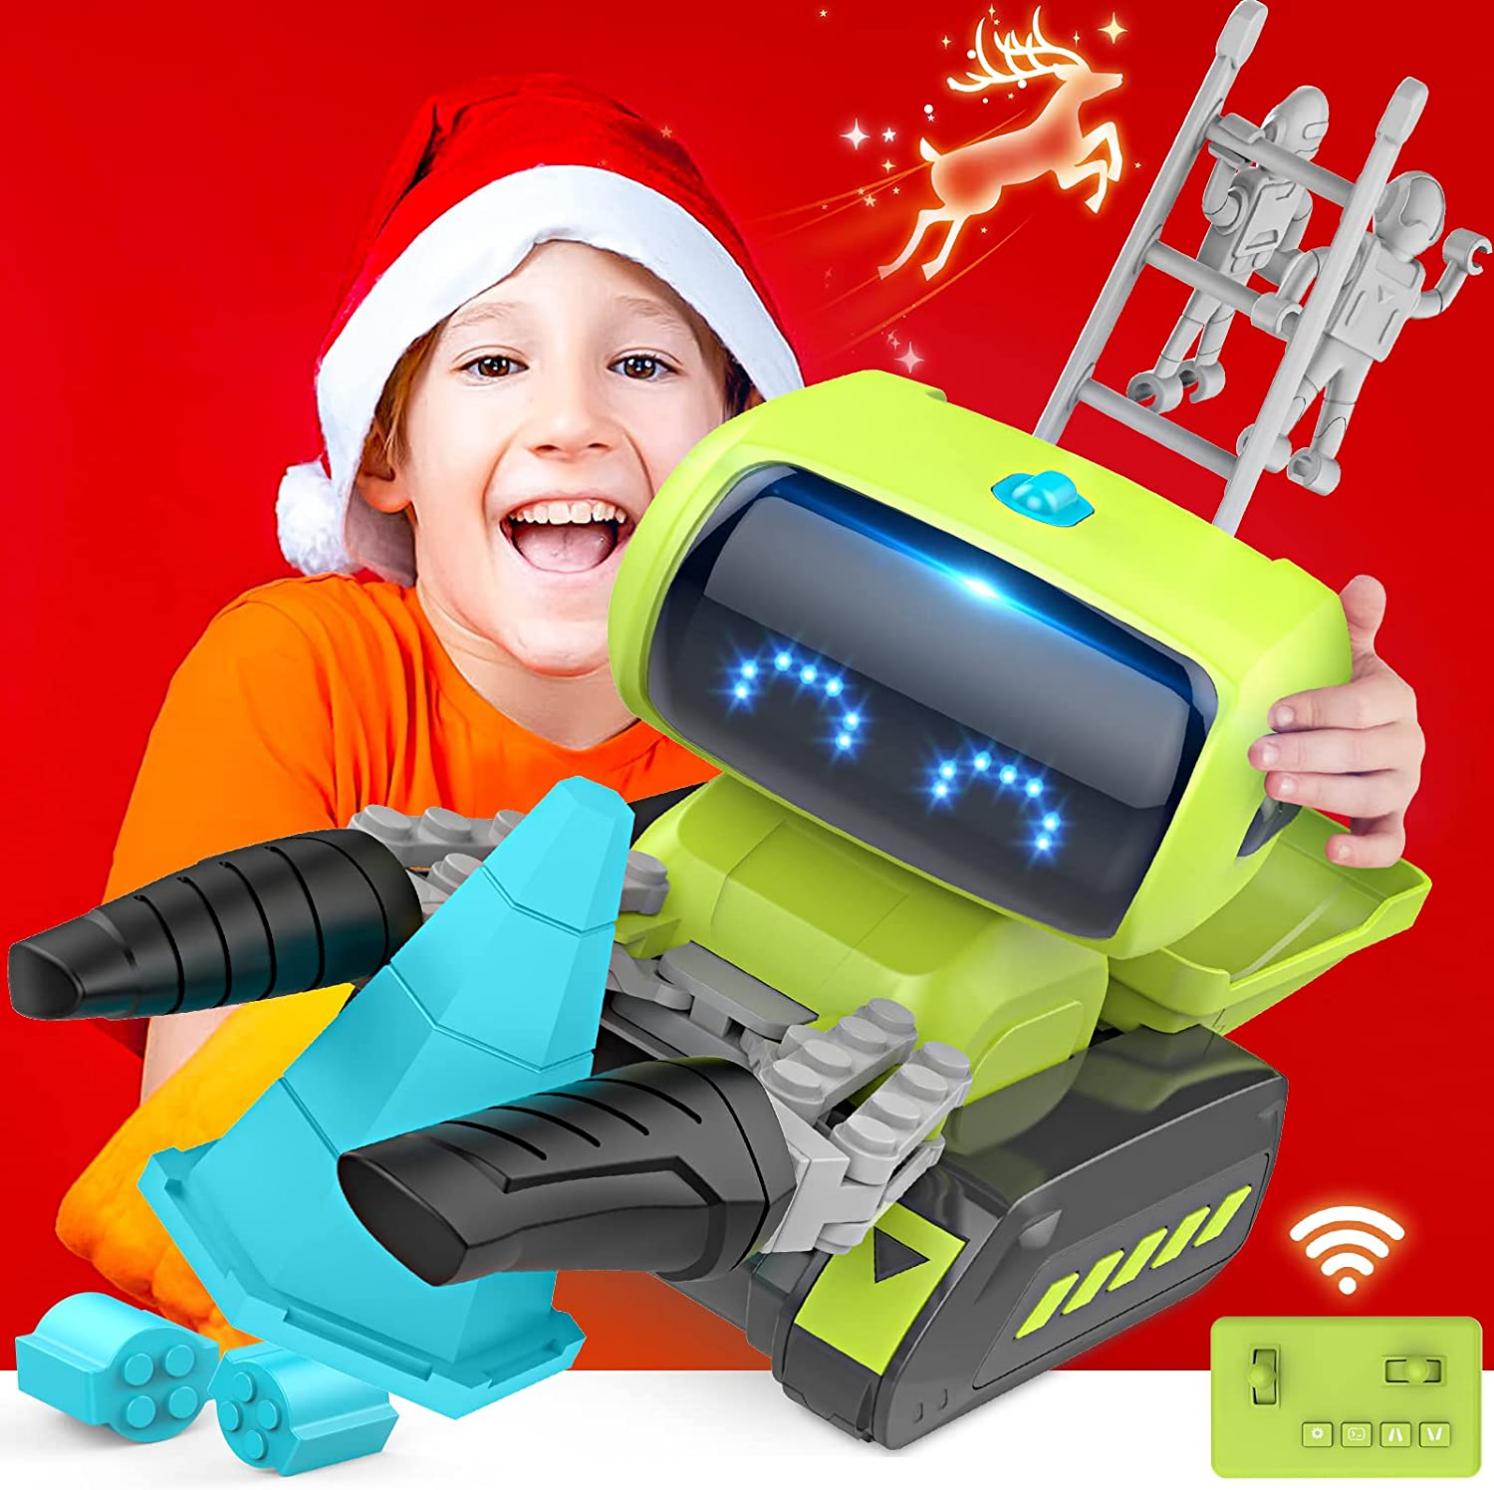 Robot Toys for Kids 3-5 5-7 8-12, [12.5 Inch] RC Programmable Robots for Kids 3-5 6-8 8-12, Remote Control Robot, for 3 4 5 6 7 8-12 Year Old Boys Girls Kids Birthday 2022